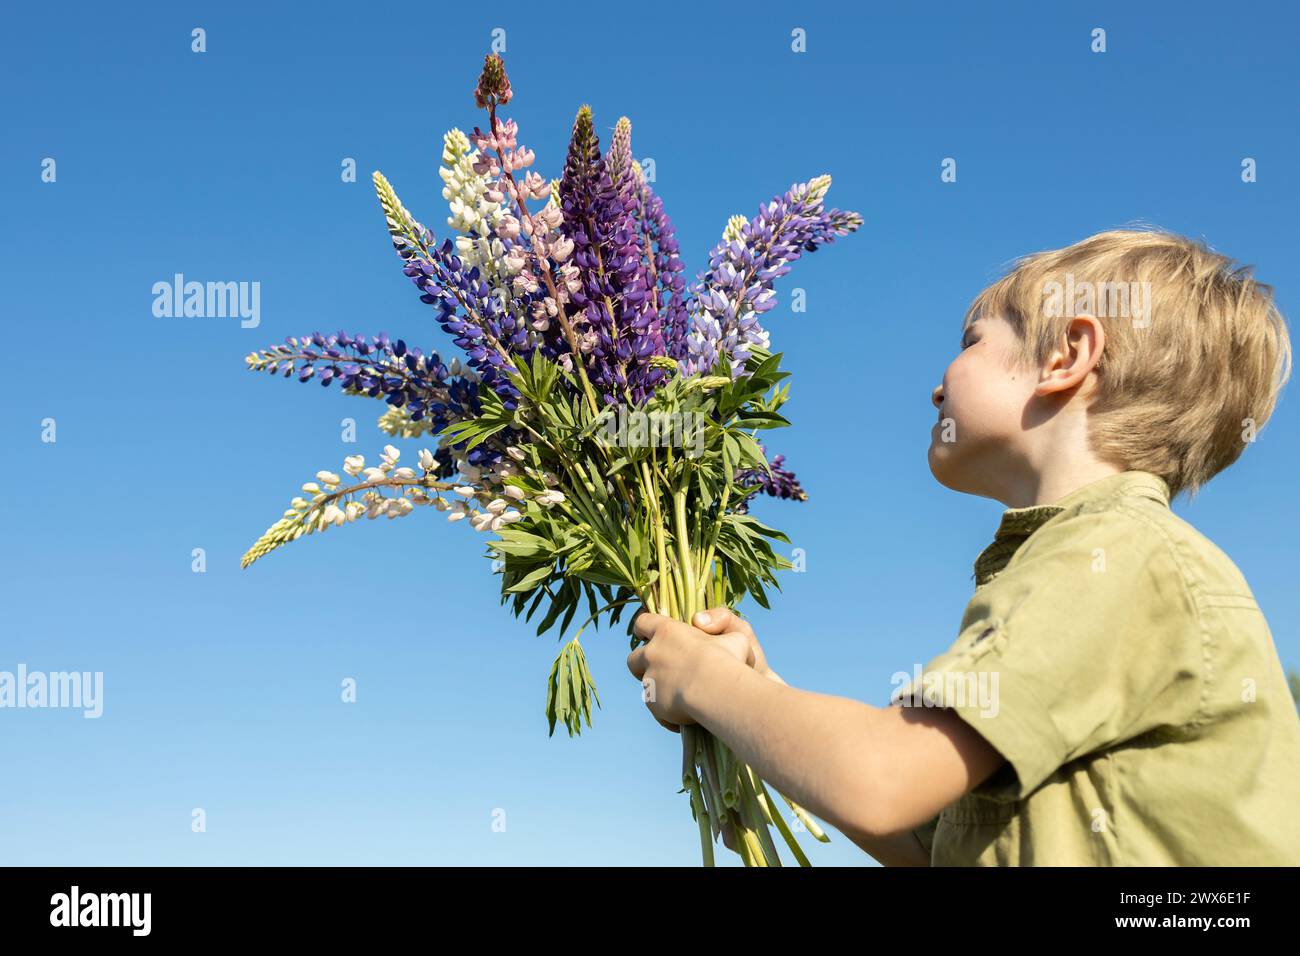 boy is holding in his hands a large bouquet of blooming purple lupine flowers. Positive spring sunny atmosphere, bouquet for mom, joy, festive mood Stock Photo